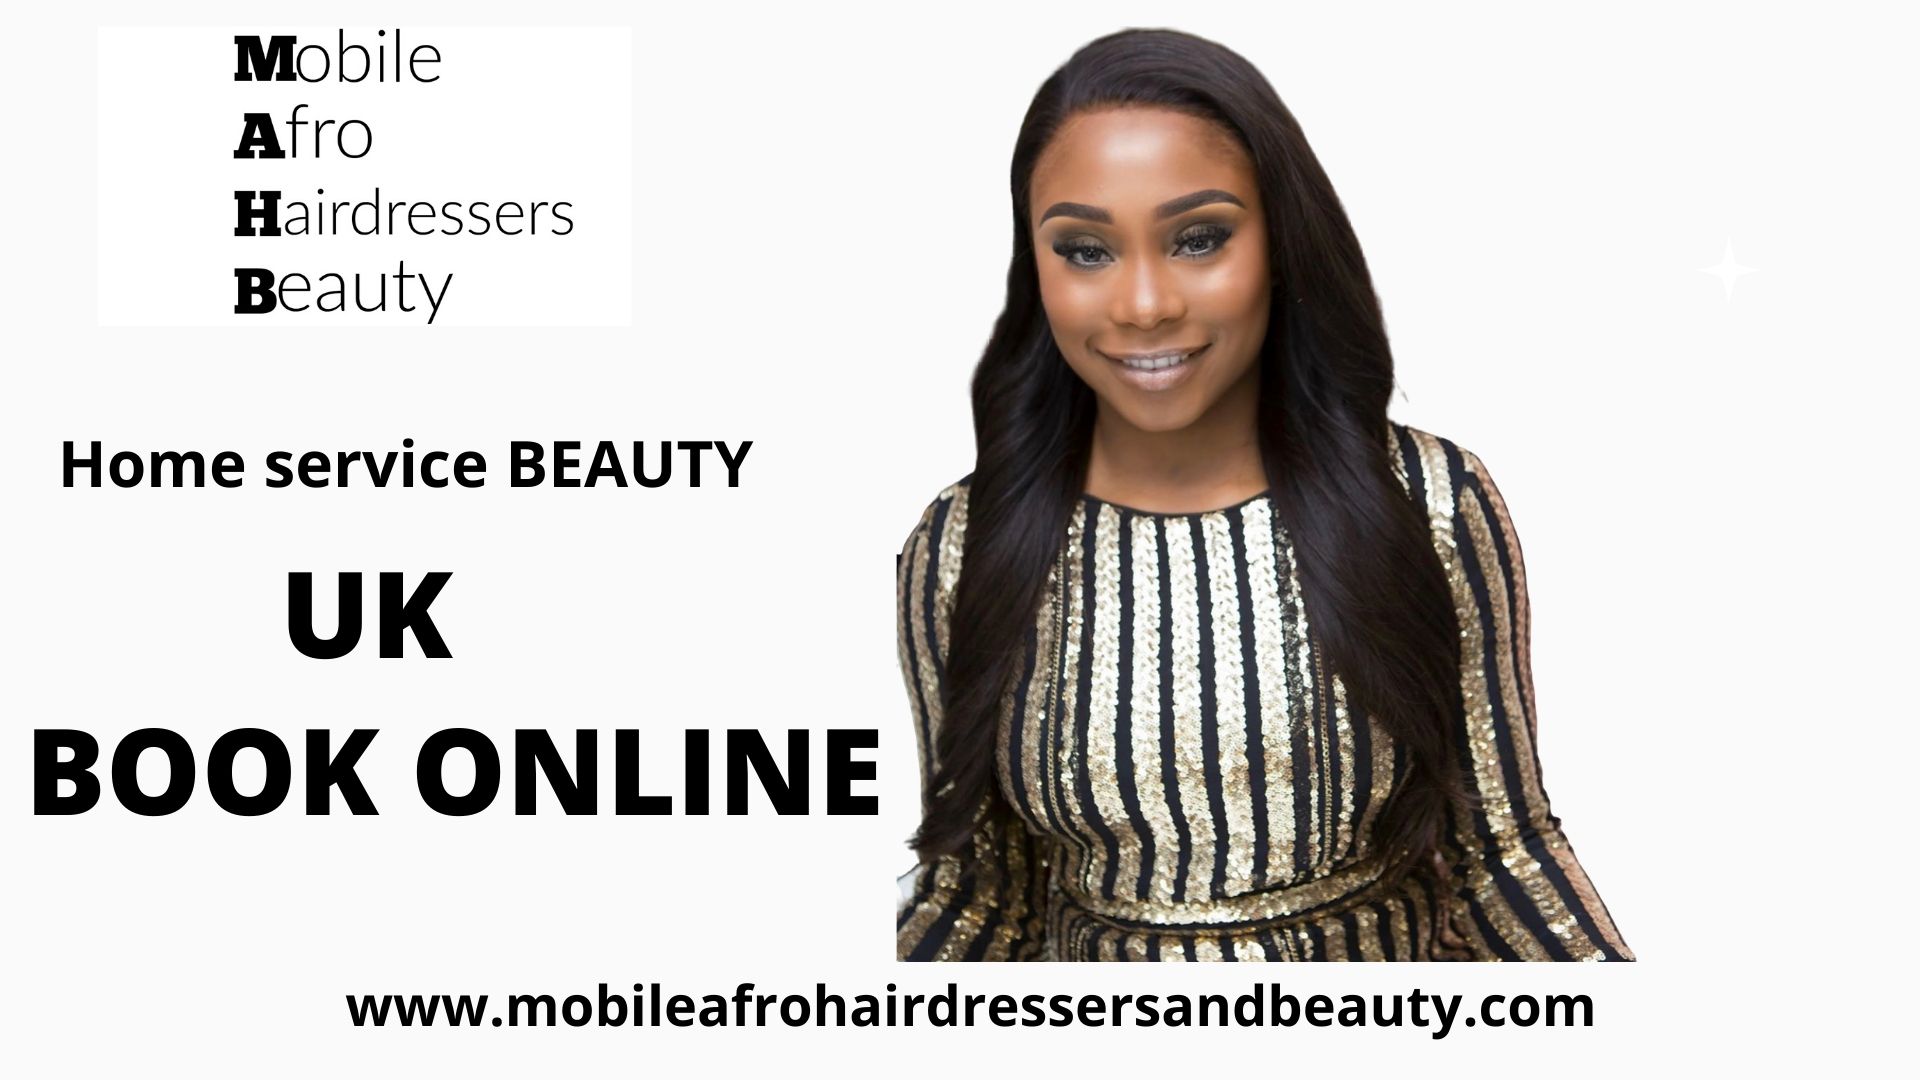 Why You Need A Mobile Hairdresser, Mobile Makeup Artist, And Home Service Beauty Treatments